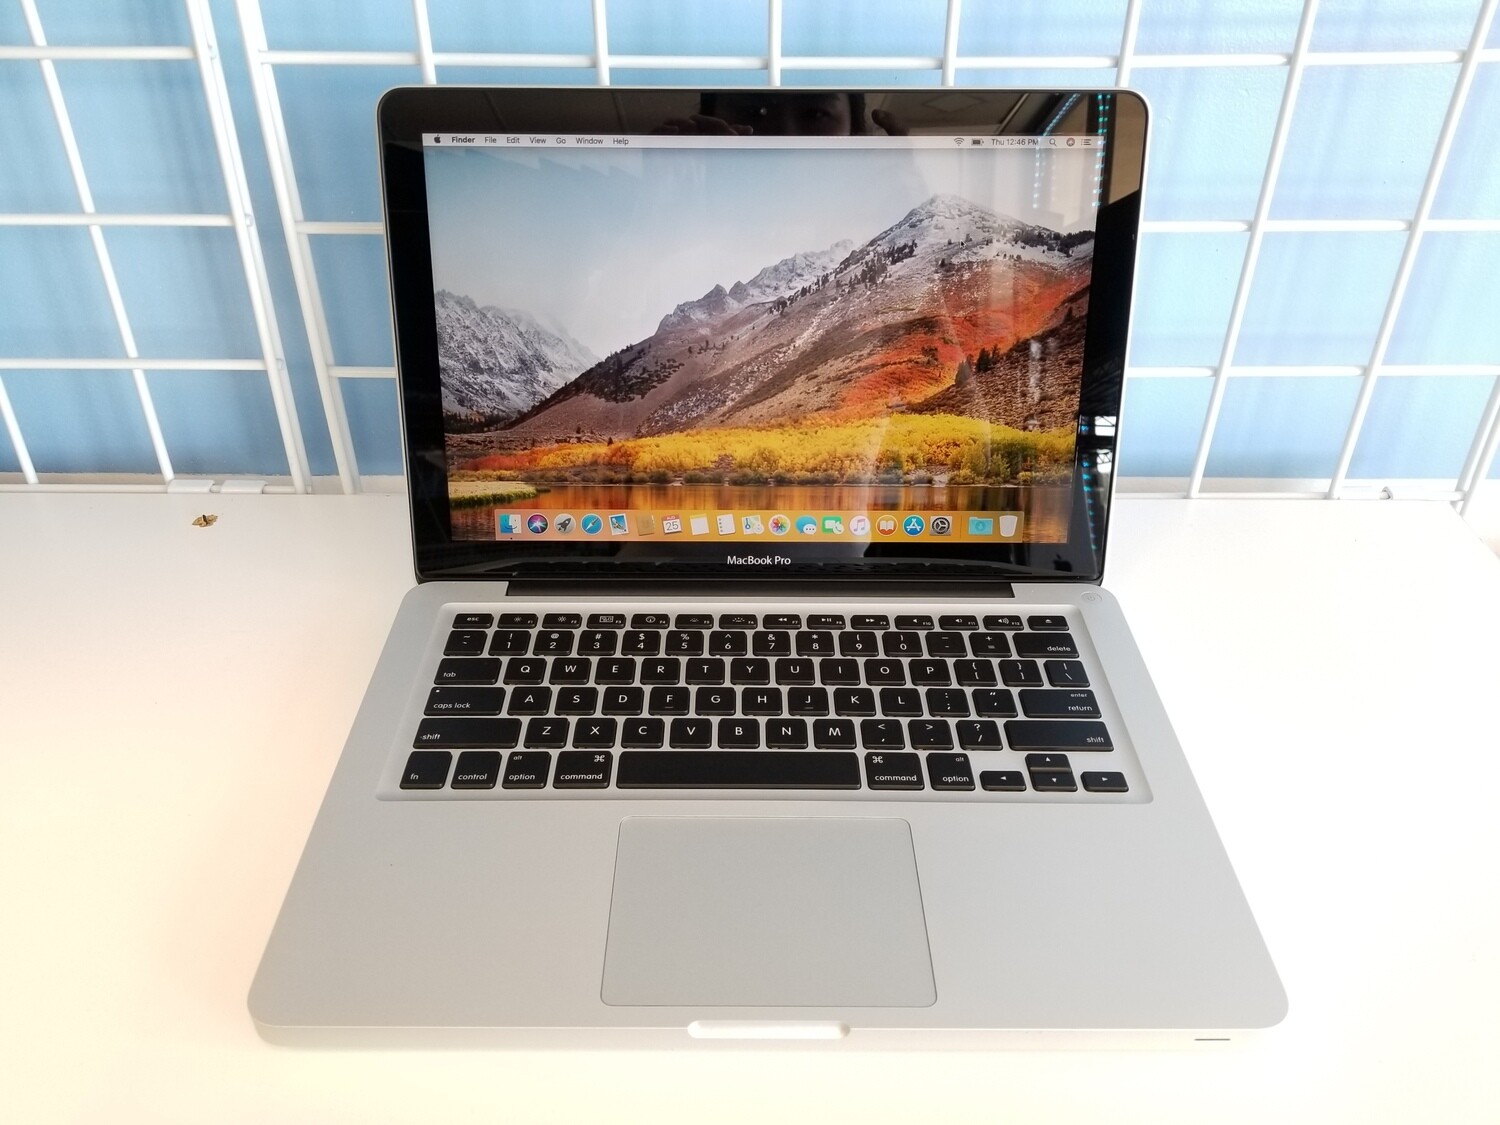 Apple MacBook Pro 13" 2010 A1278 Intel Core 2 Duo @2.4GHz 8GB RAM 250GB  SSD, 1280x800, macOS High Sierra, NVIDIA GeForce 320M 256 MB - Store - Sell  Your Macbook Pro, Sell